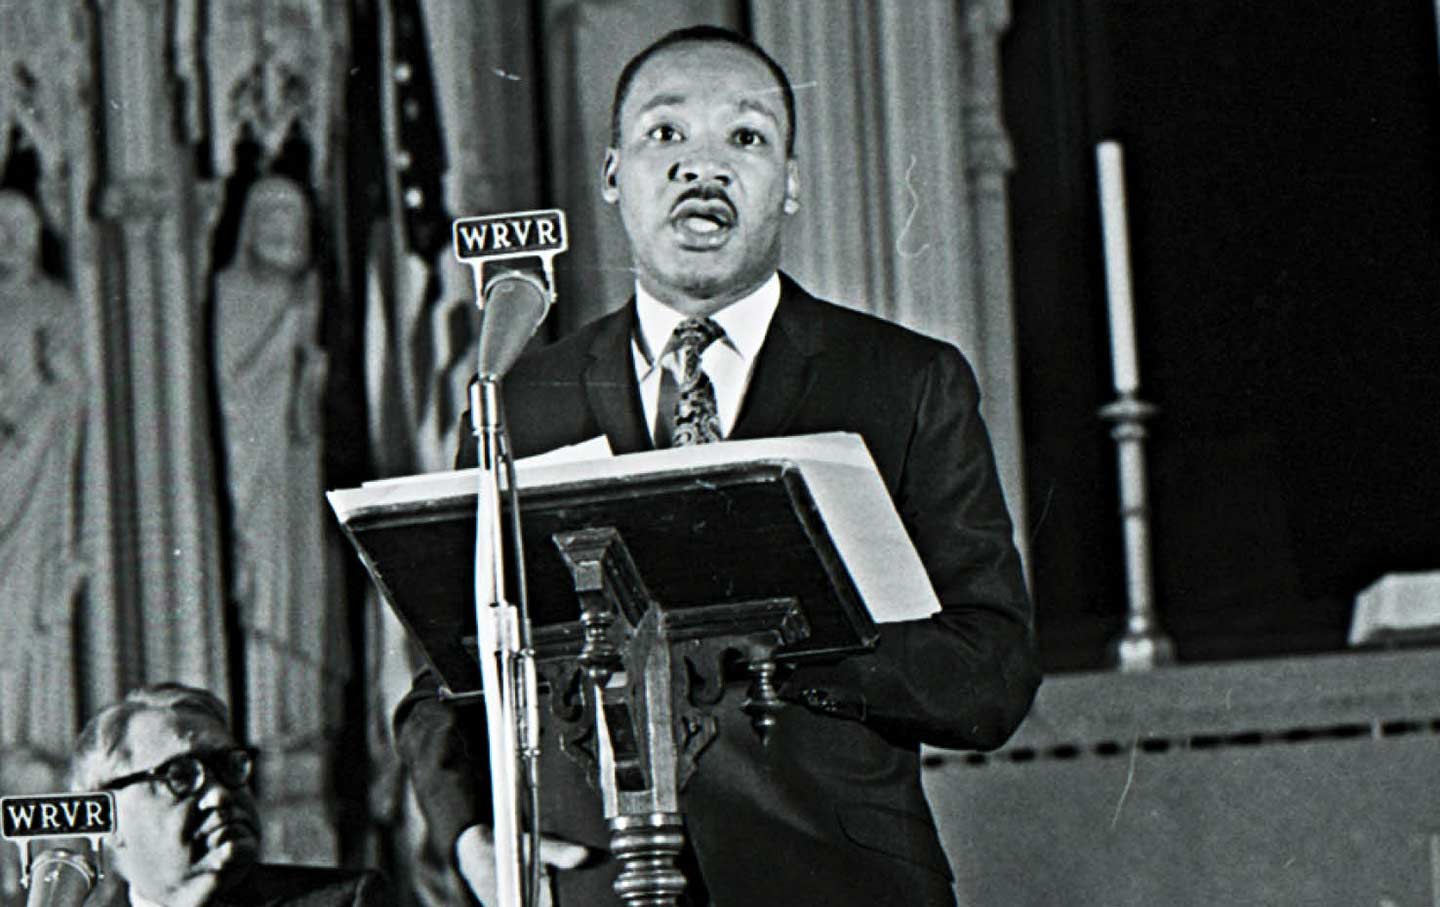 During a sermon in 1967, the Rev. Dr. Martin Luther King Jr. urged the United States to repent and abandon its “tragic, reckless adventure in Vietnam.”